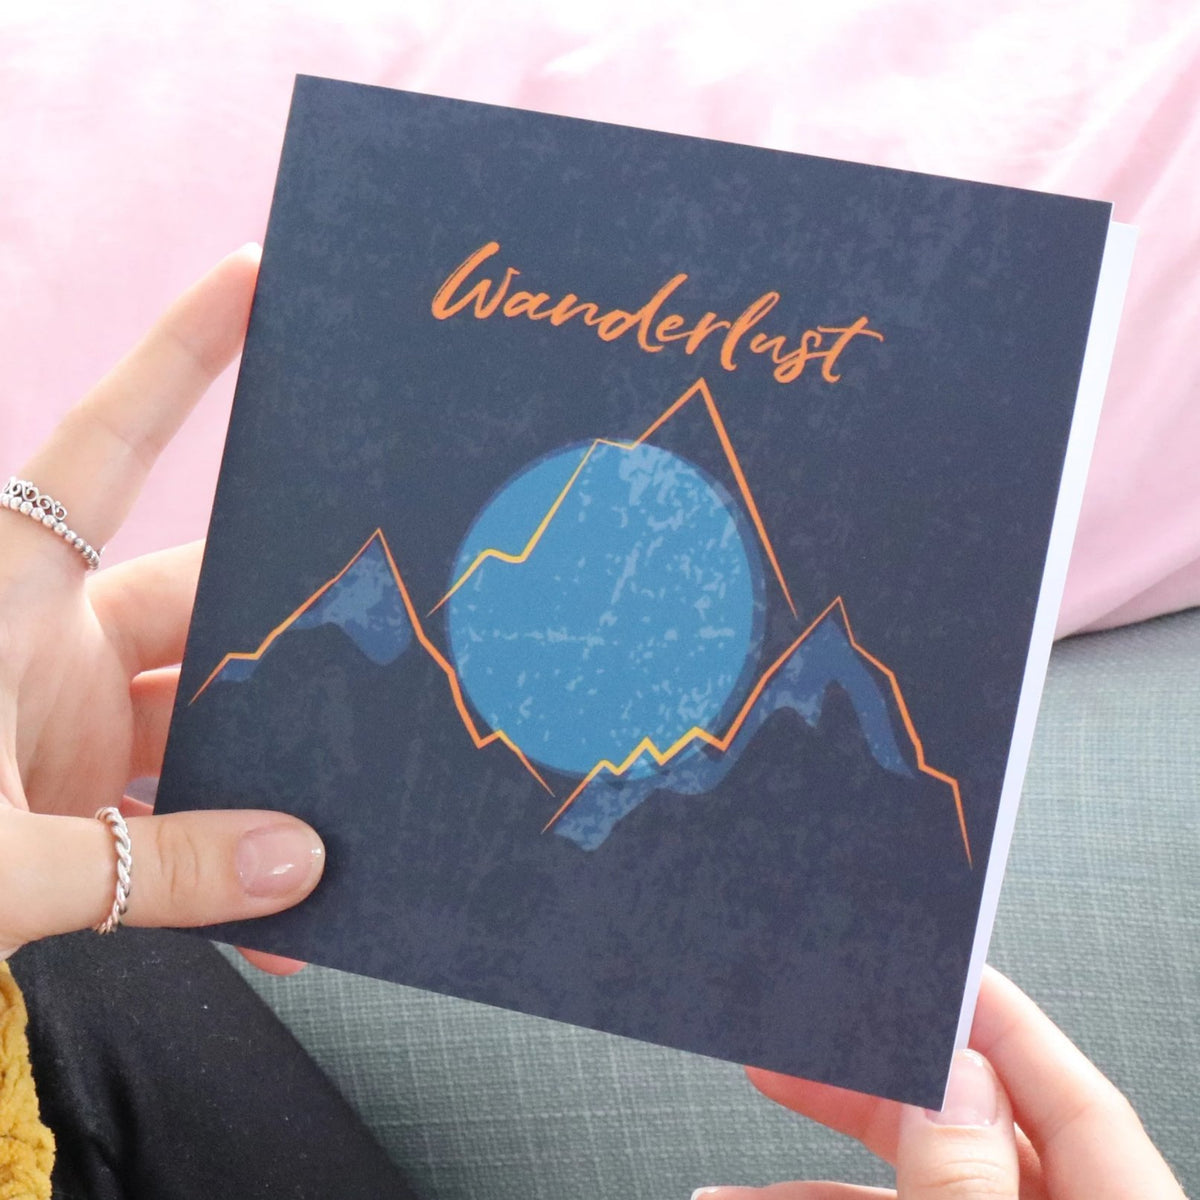 Wanderlust greeting gift card for someone going away travelling